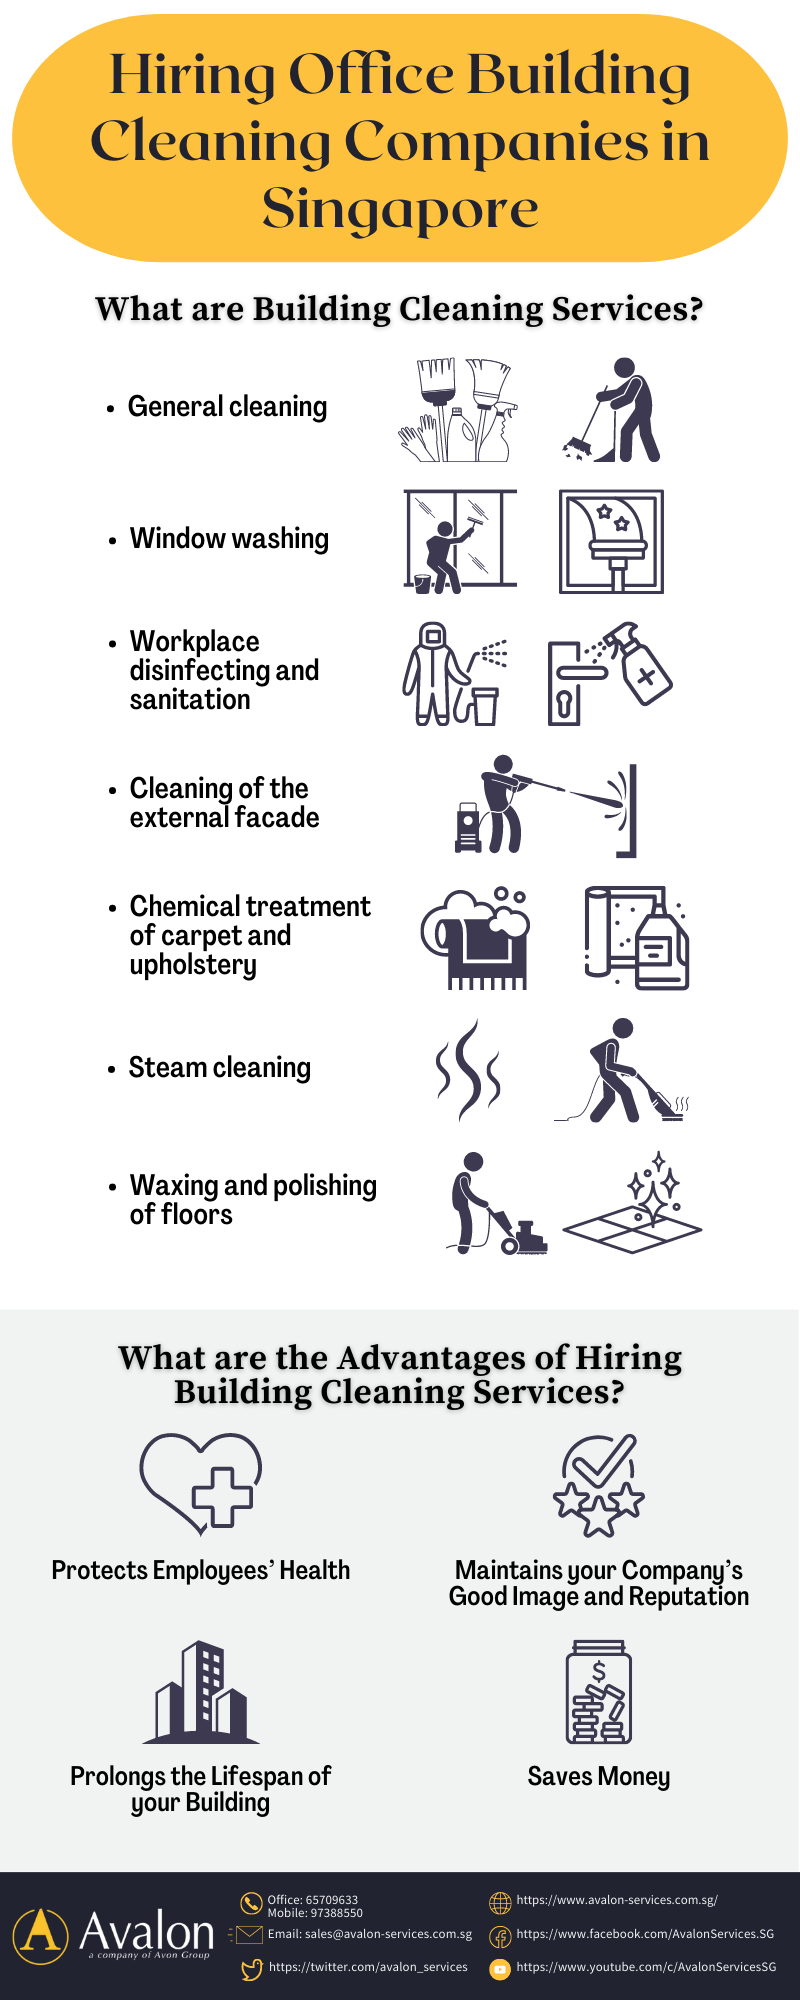 Hiring Office Building Cleaning Companies in Singapore